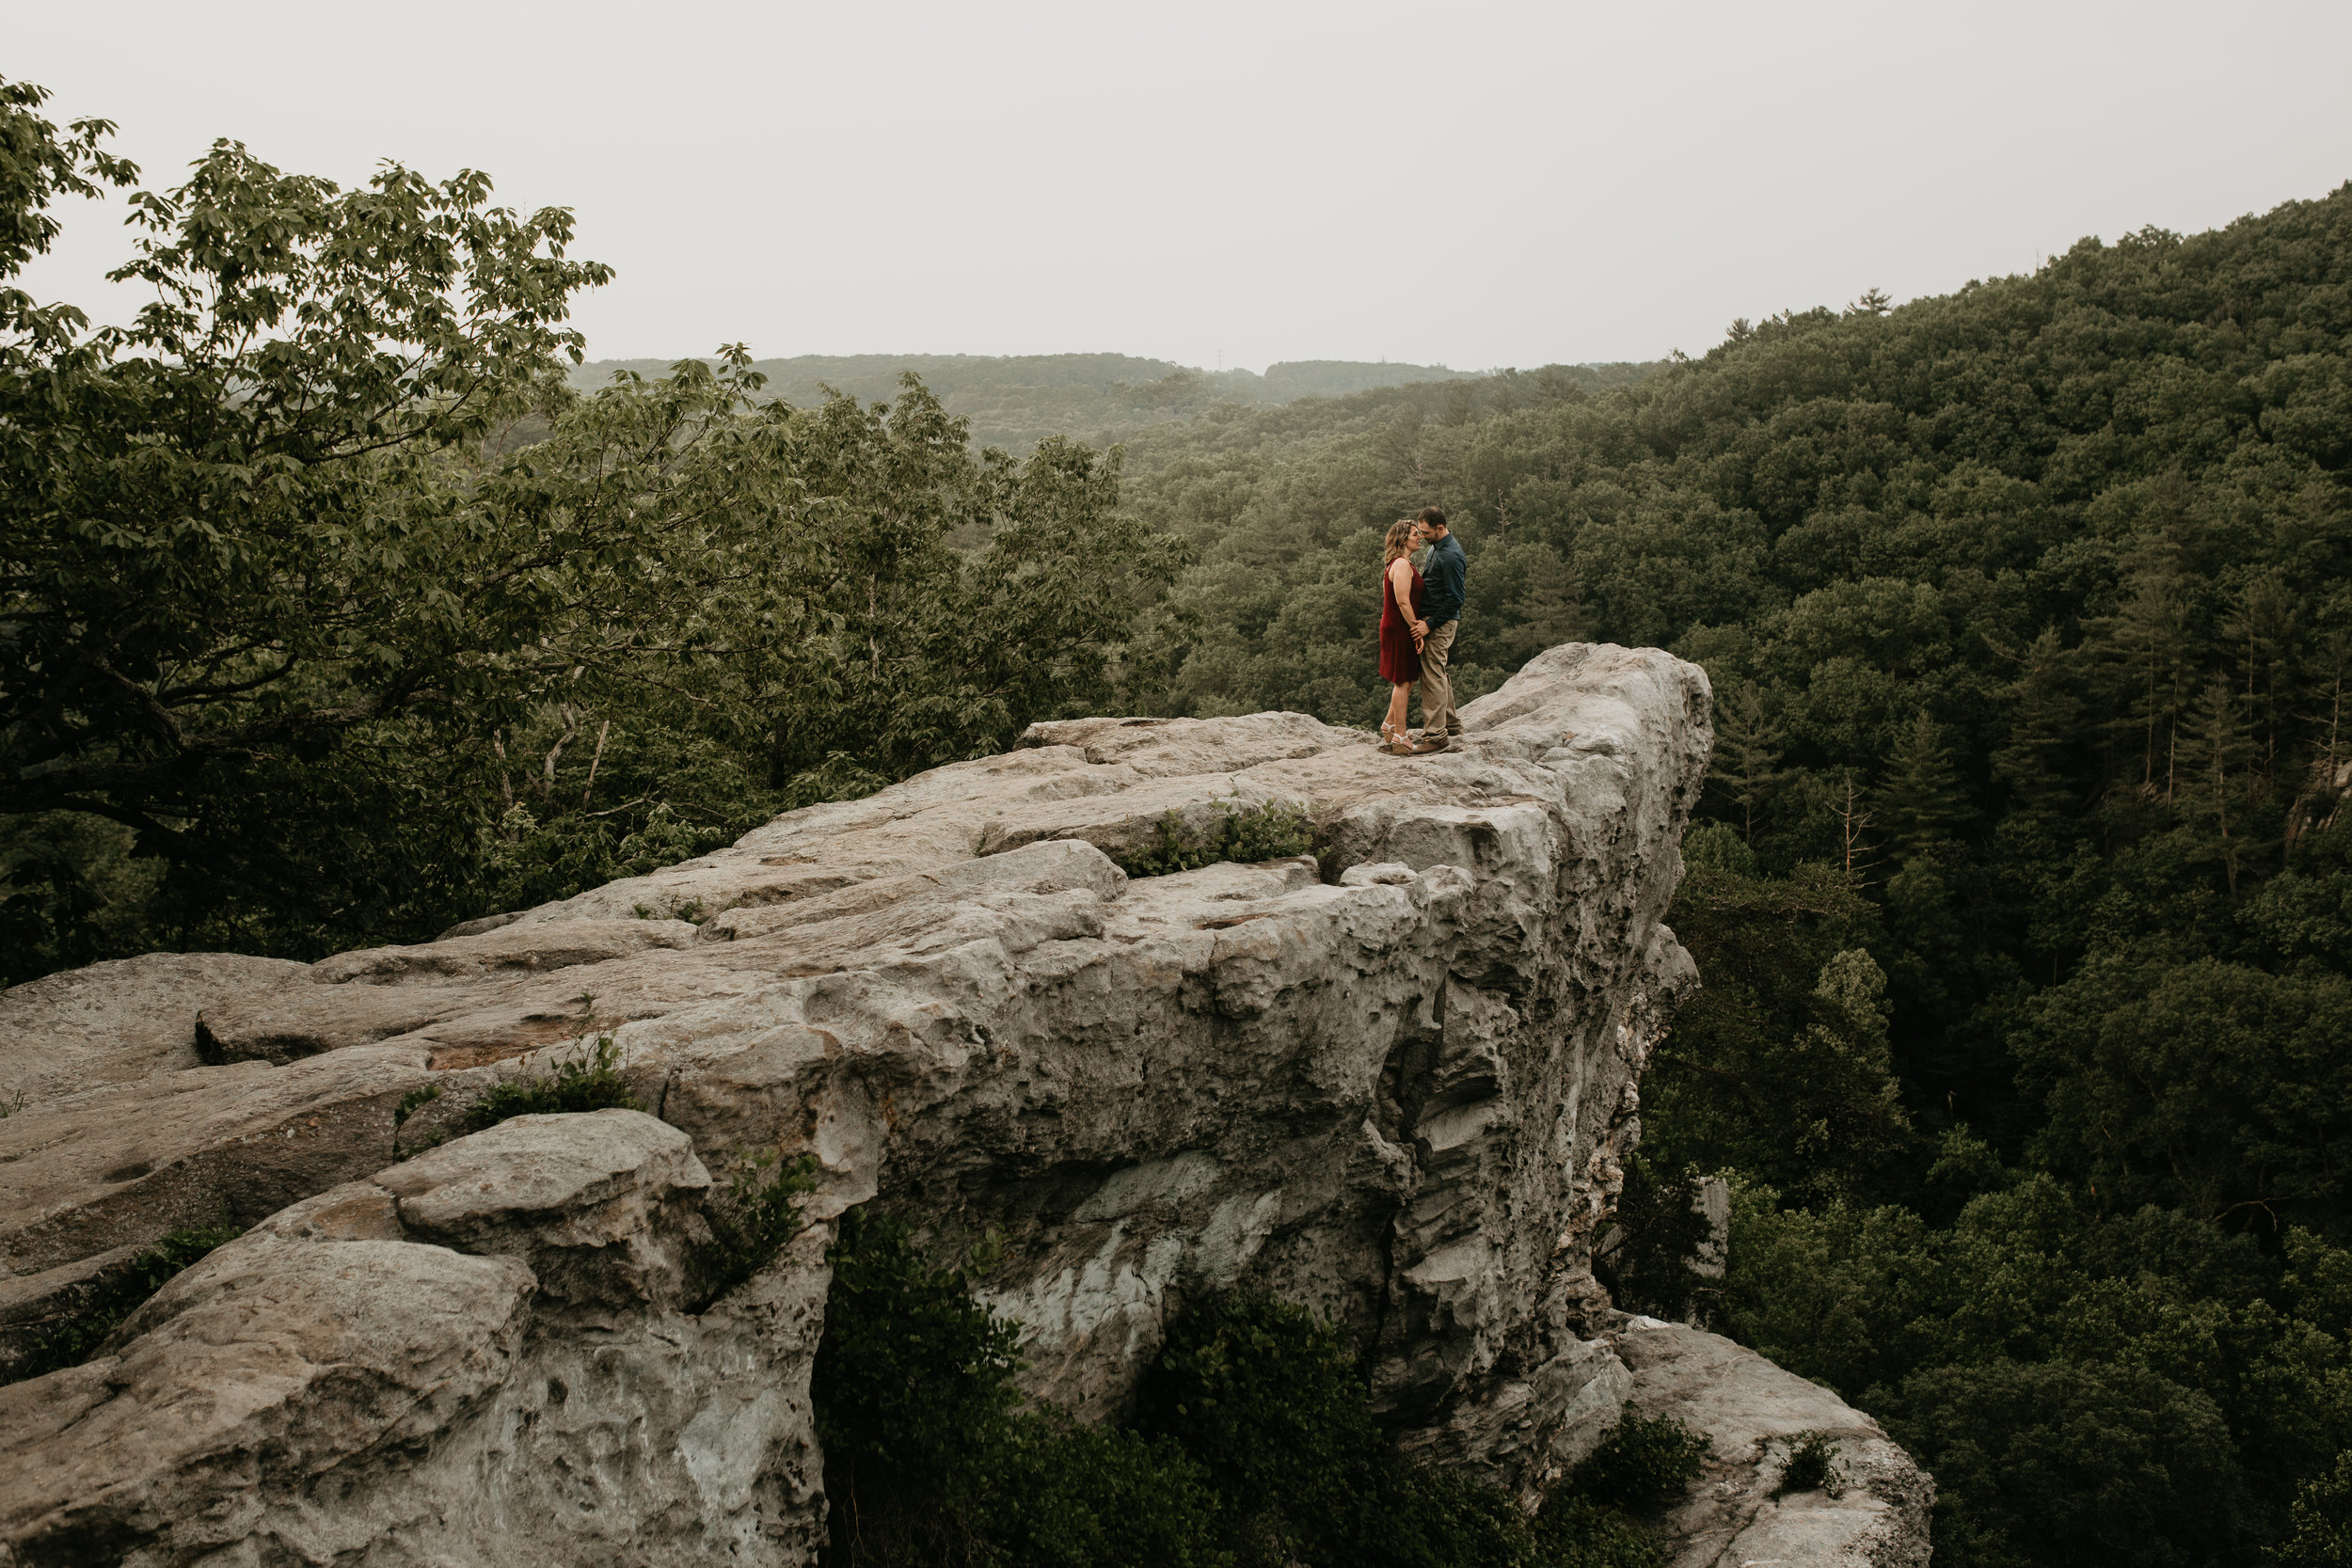 Nicole-Daacke-Photography-rock-state-park-overlook-king-queen-seat-maryland-hiking-adventure-engagement-session-photos-portraits-summer-bel-air-dog-engagement-session-28.jpg